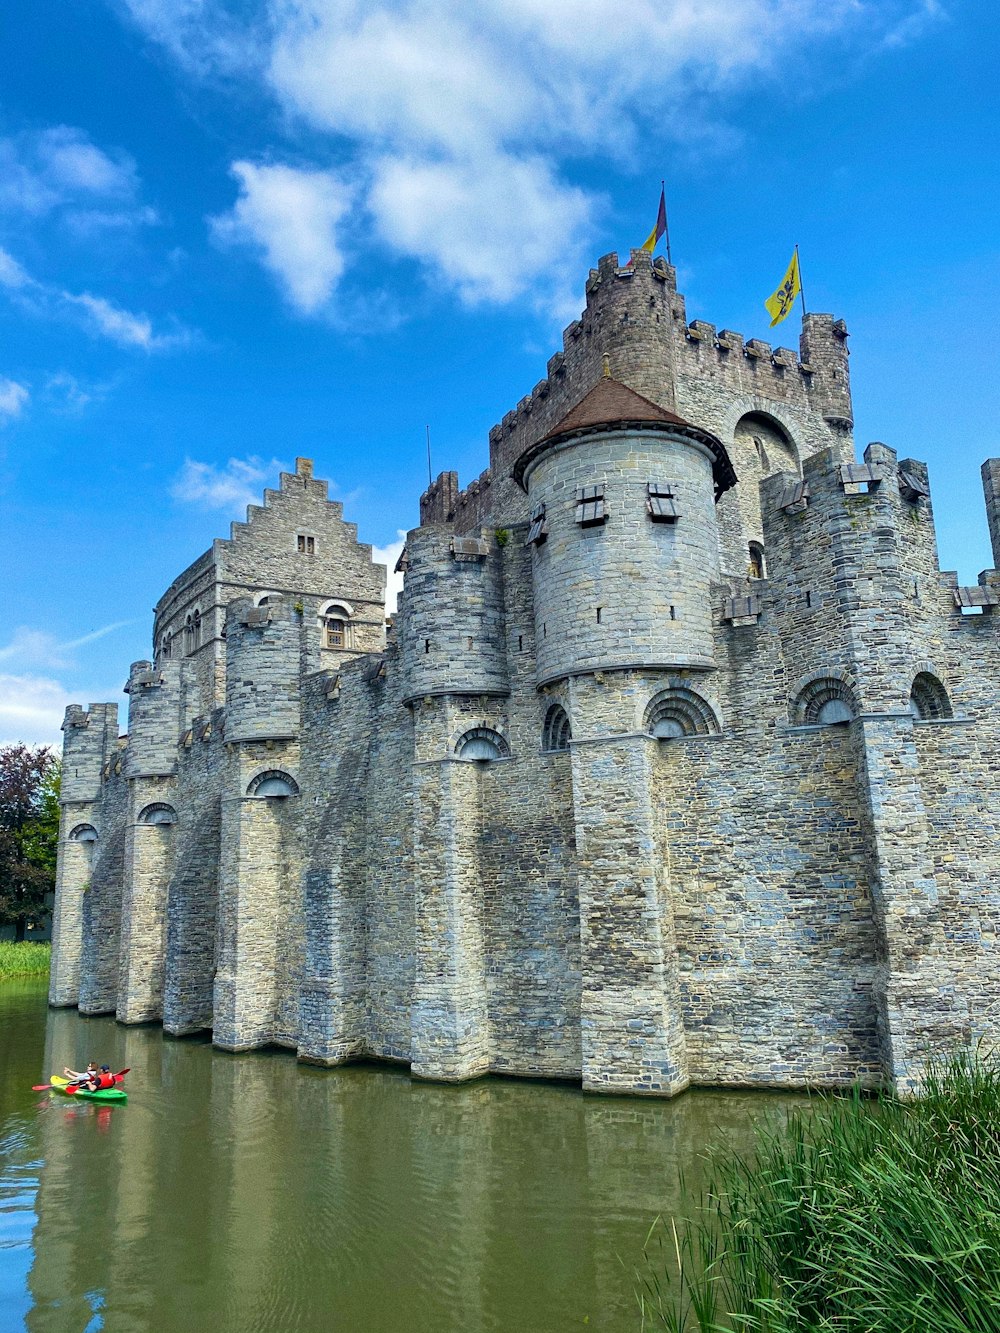 grey concrete castle near body of water under blue sky during daytime